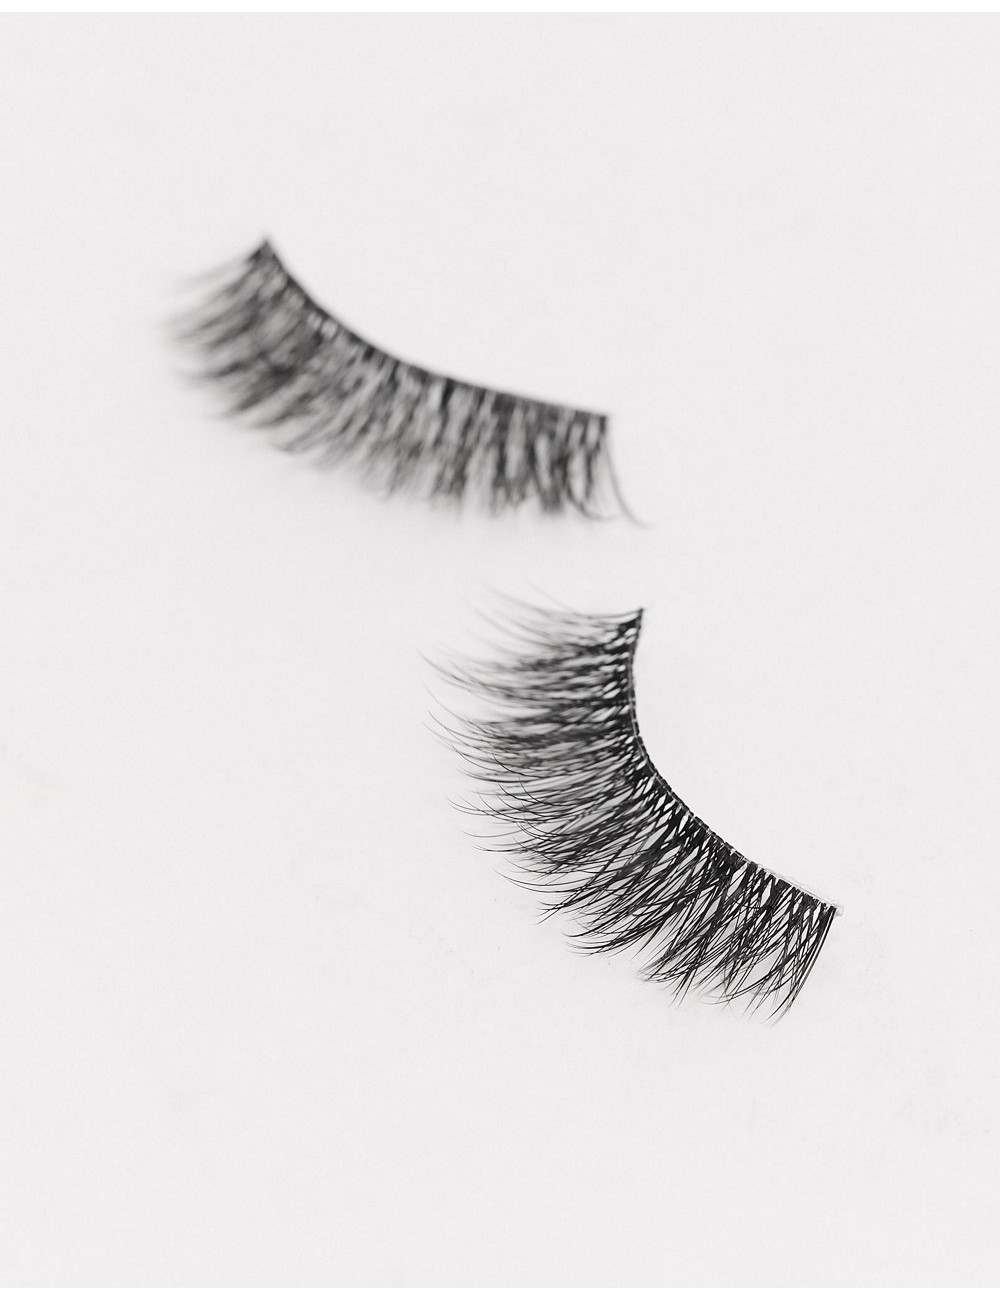 Ardell 8D Lashes - 950